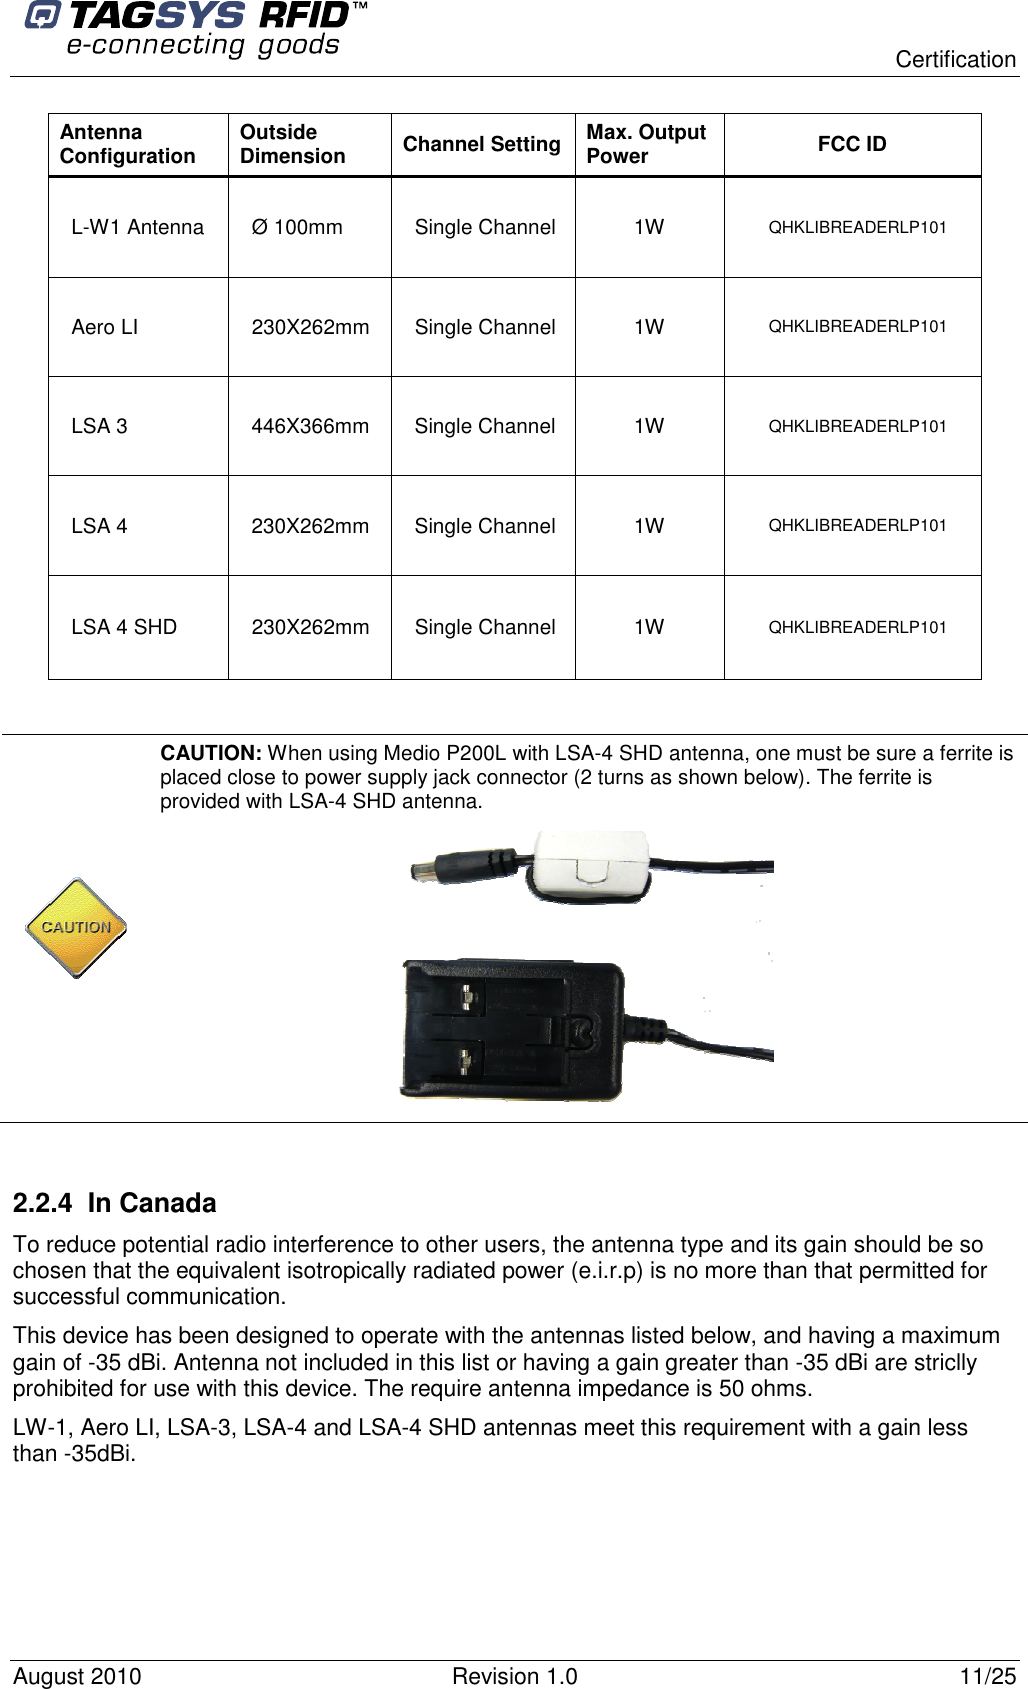  Certification August 2010  Revision 1.0  11/25 Antenna Configuration  Outside Dimension  Channel Setting  Max. Output Power  FCC ID L-W1 Antenna  Ø 100mm  Single Channel  1W QHKLIBREADERLP101 Aero LI  230X262mm  Single Channel  1W QHKLIBREADERLP101 LSA 3  446X366mm  Single Channel  1W QHKLIBREADERLP101 LSA 4  230X262mm  Single Channel  1W QHKLIBREADERLP101 LSA 4 SHD  230X262mm  Single Channel  1W QHKLIBREADERLP101   2.2.4  In Canada To reduce potential radio interference to other users, the antenna type and its gain should be so chosen that the equivalent isotropically radiated power (e.i.r.p) is no more than that permitted for successful communication. This device has been designed to operate with the antennas listed below, and having a maximum gain of -35 dBi. Antenna not included in this list or having a gain greater than -35 dBi are striclly prohibited for use with this device. The require antenna impedance is 50 ohms. LW-1, Aero LI, LSA-3, LSA-4 and LSA-4 SHD antennas meet this requirement with a gain less than -35dBi.  CAUTION: When using Medio P200L with LSA-4 SHD antenna, one must be sure a ferrite is placed close to power supply jack connector (2 turns as shown below). The ferrite is provided with LSA-4 SHD antenna.  